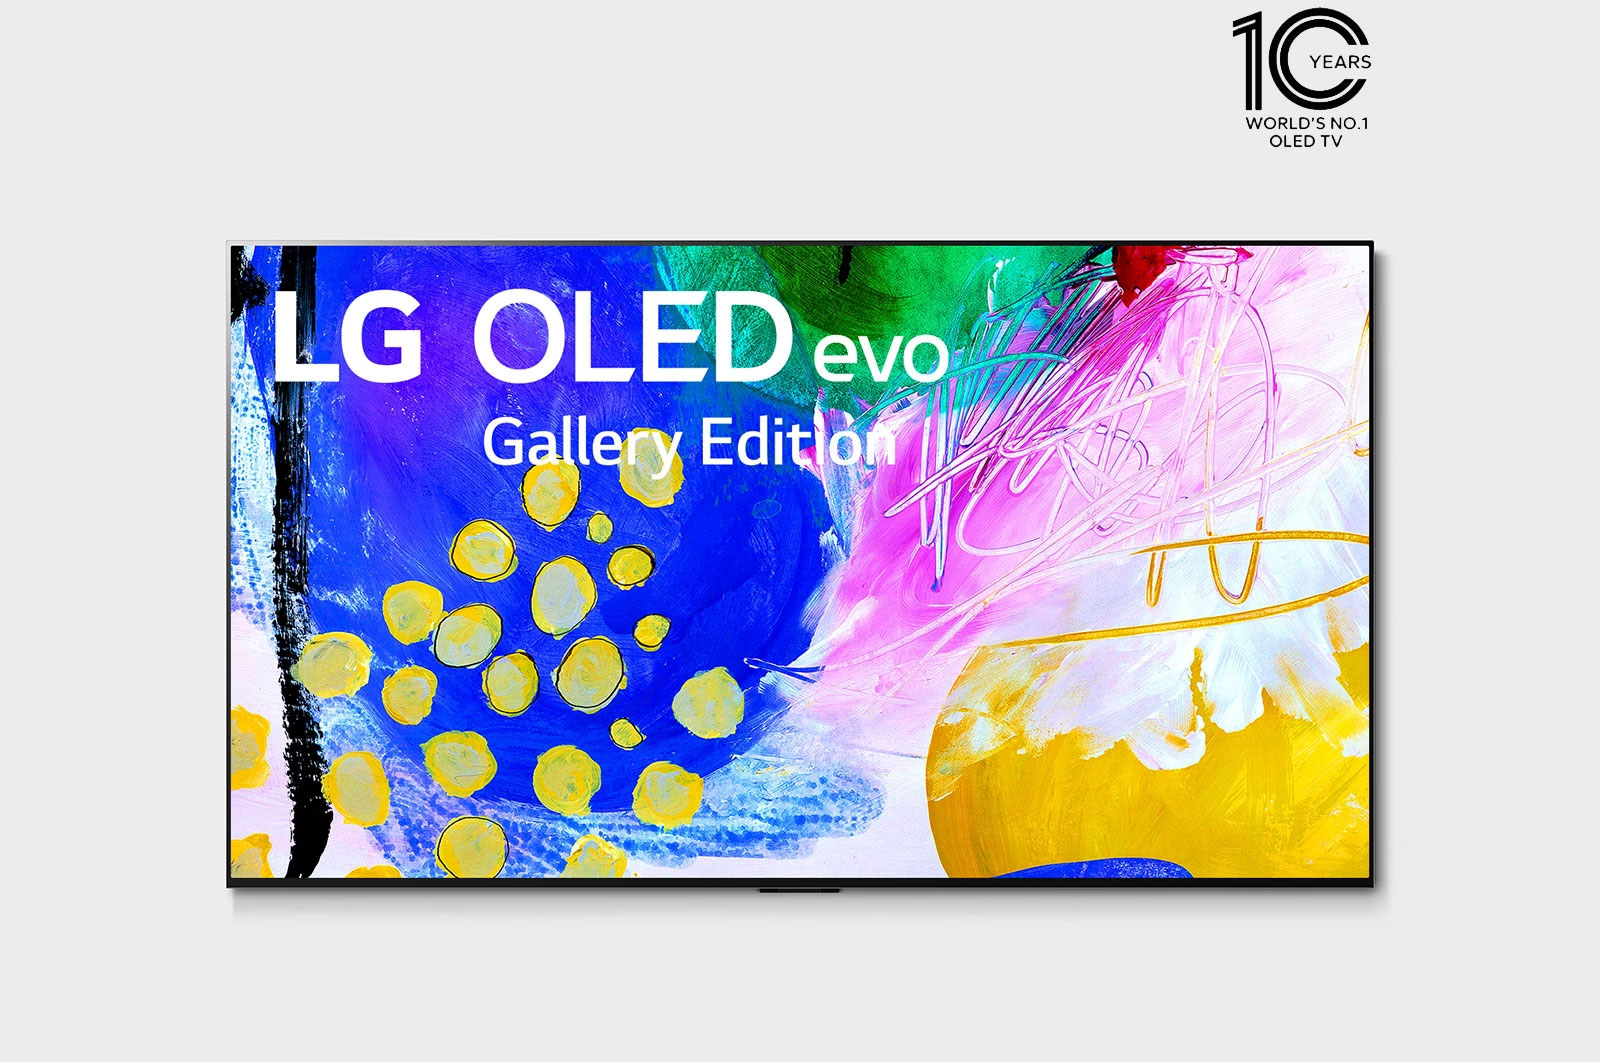 LG 4K OLED Smart TV 65 inch Series G2 with gallery design, a9 Gen5 4K  Processor, G-Sync & FreeSync for gaming. 1ms response time. - OLED65G26LA